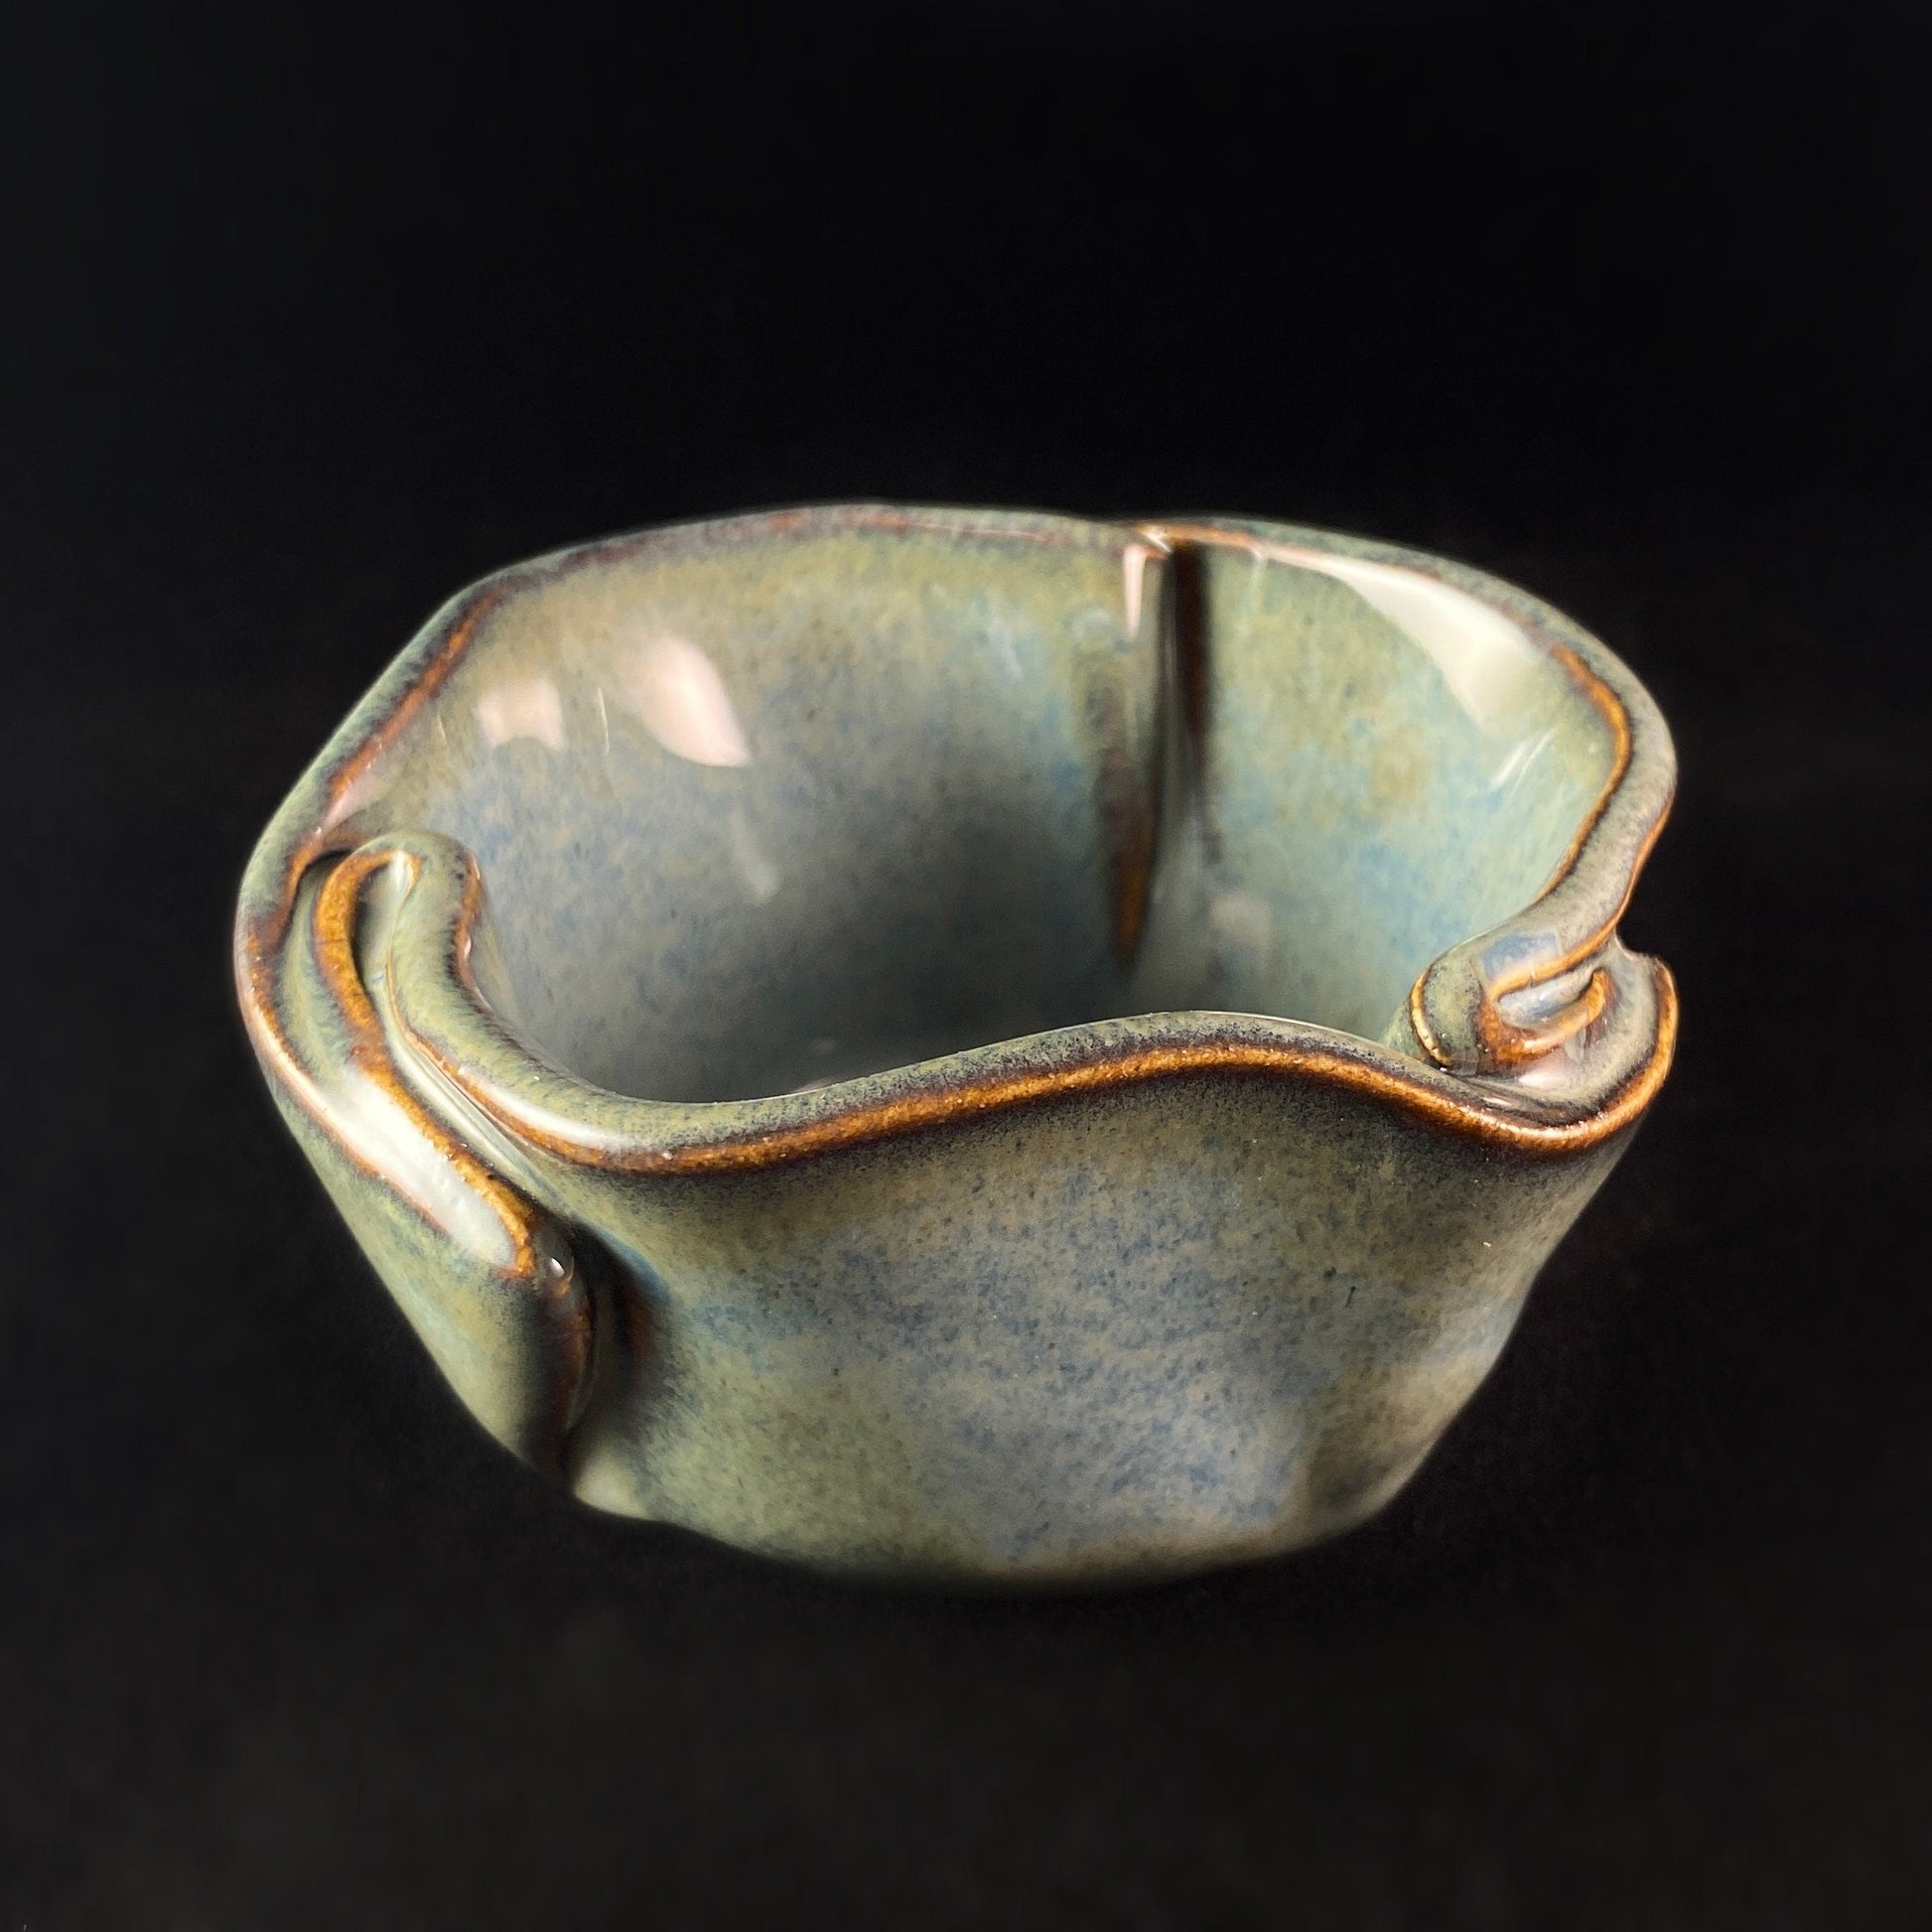 Handmade Tiny Pot with Serving Spoon, Functional and Decorative Pottery